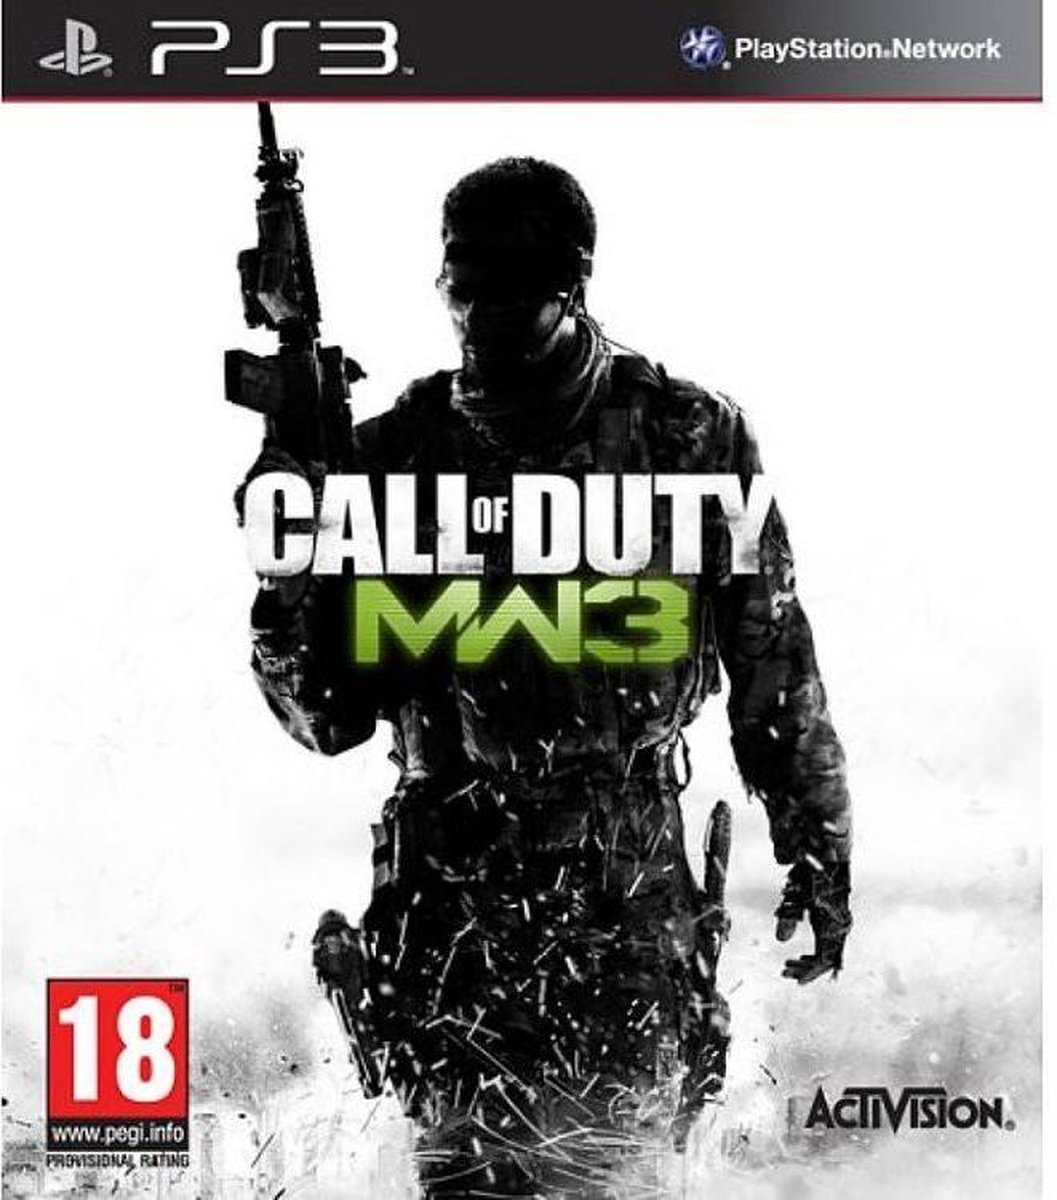 Servers mw3 ps3 How to